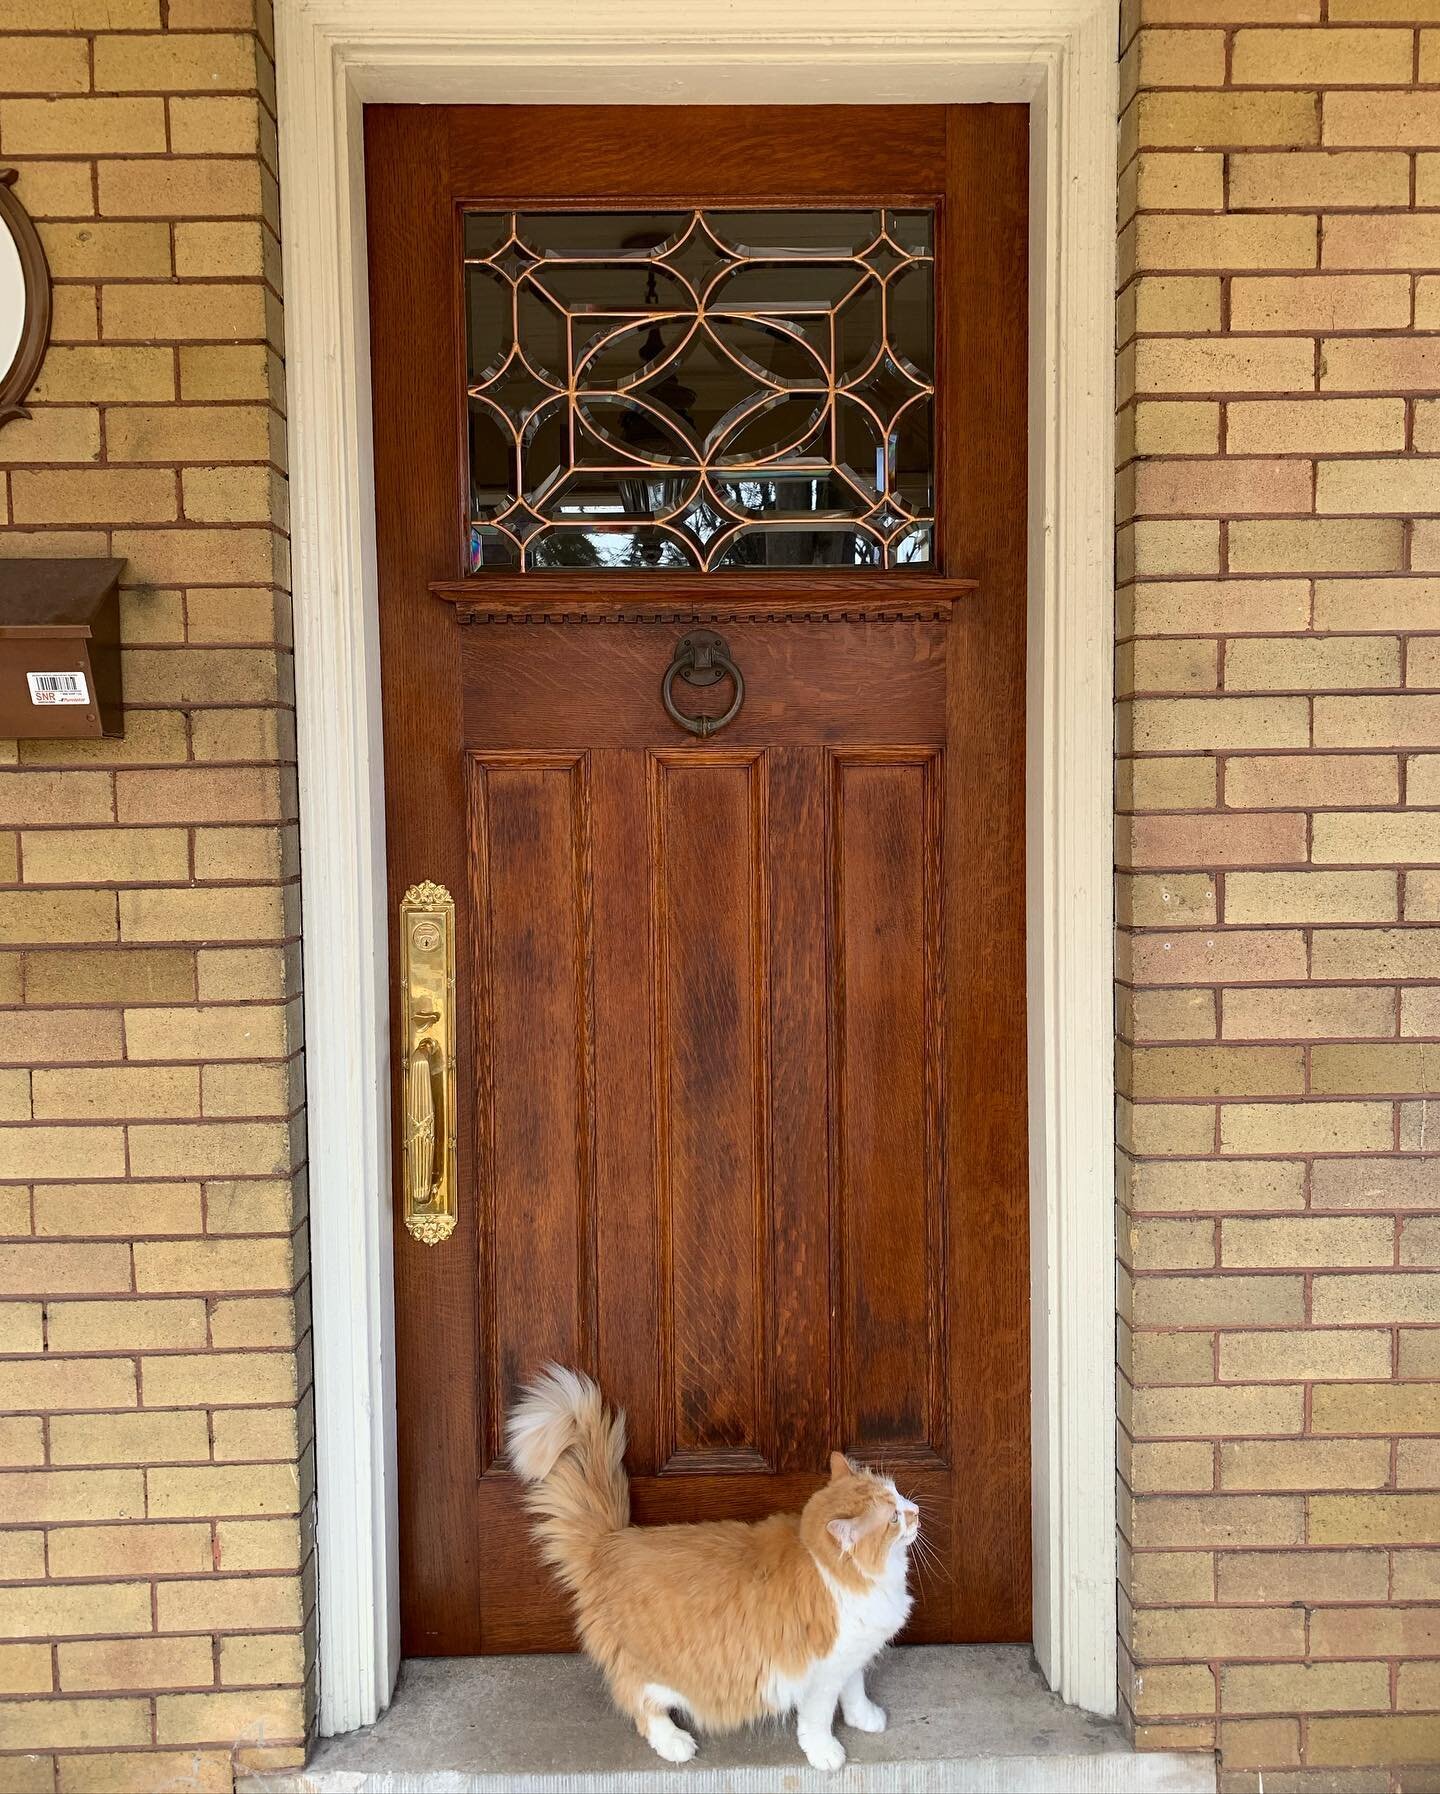 Sometimes your door just needs a little spiff-up with some new hardware and a polish. Our good friend John Storey replaced some broken beveled glass and cleaned up the original copper channel in the window and made it look brand new. We added an auto